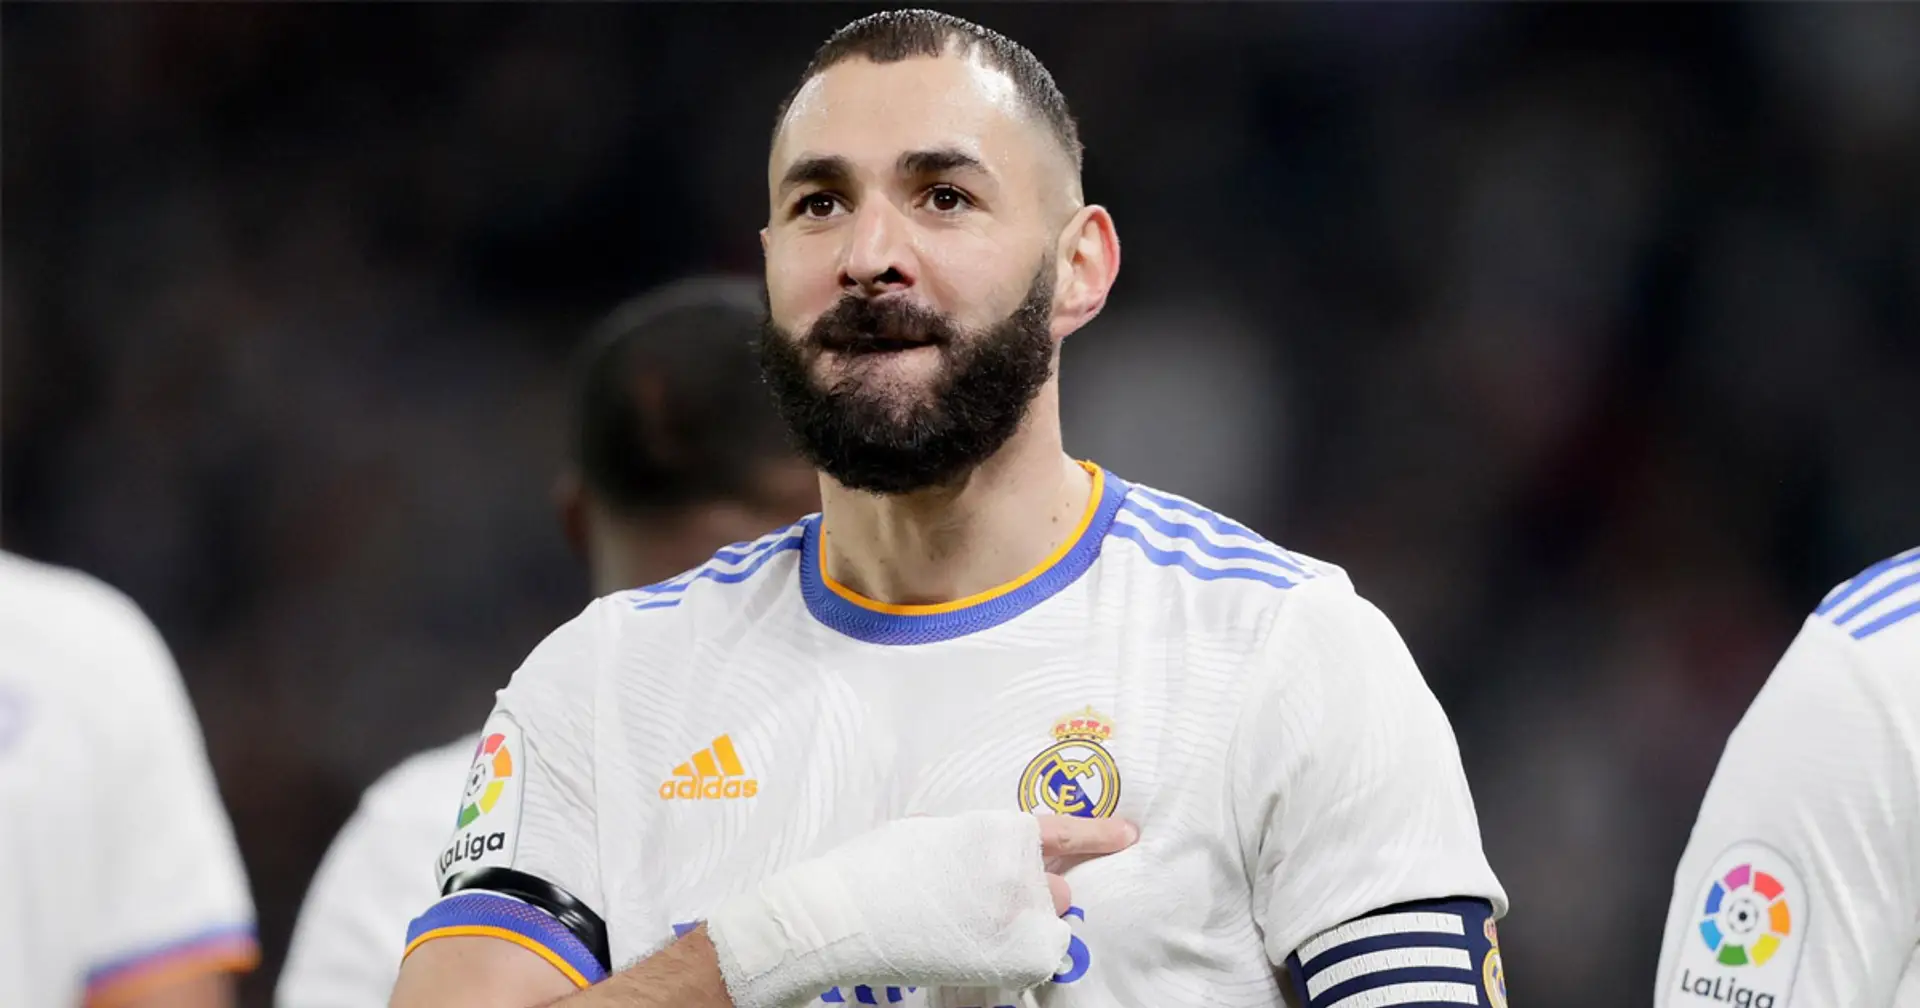 Explained: why Benzema will not play against Elche